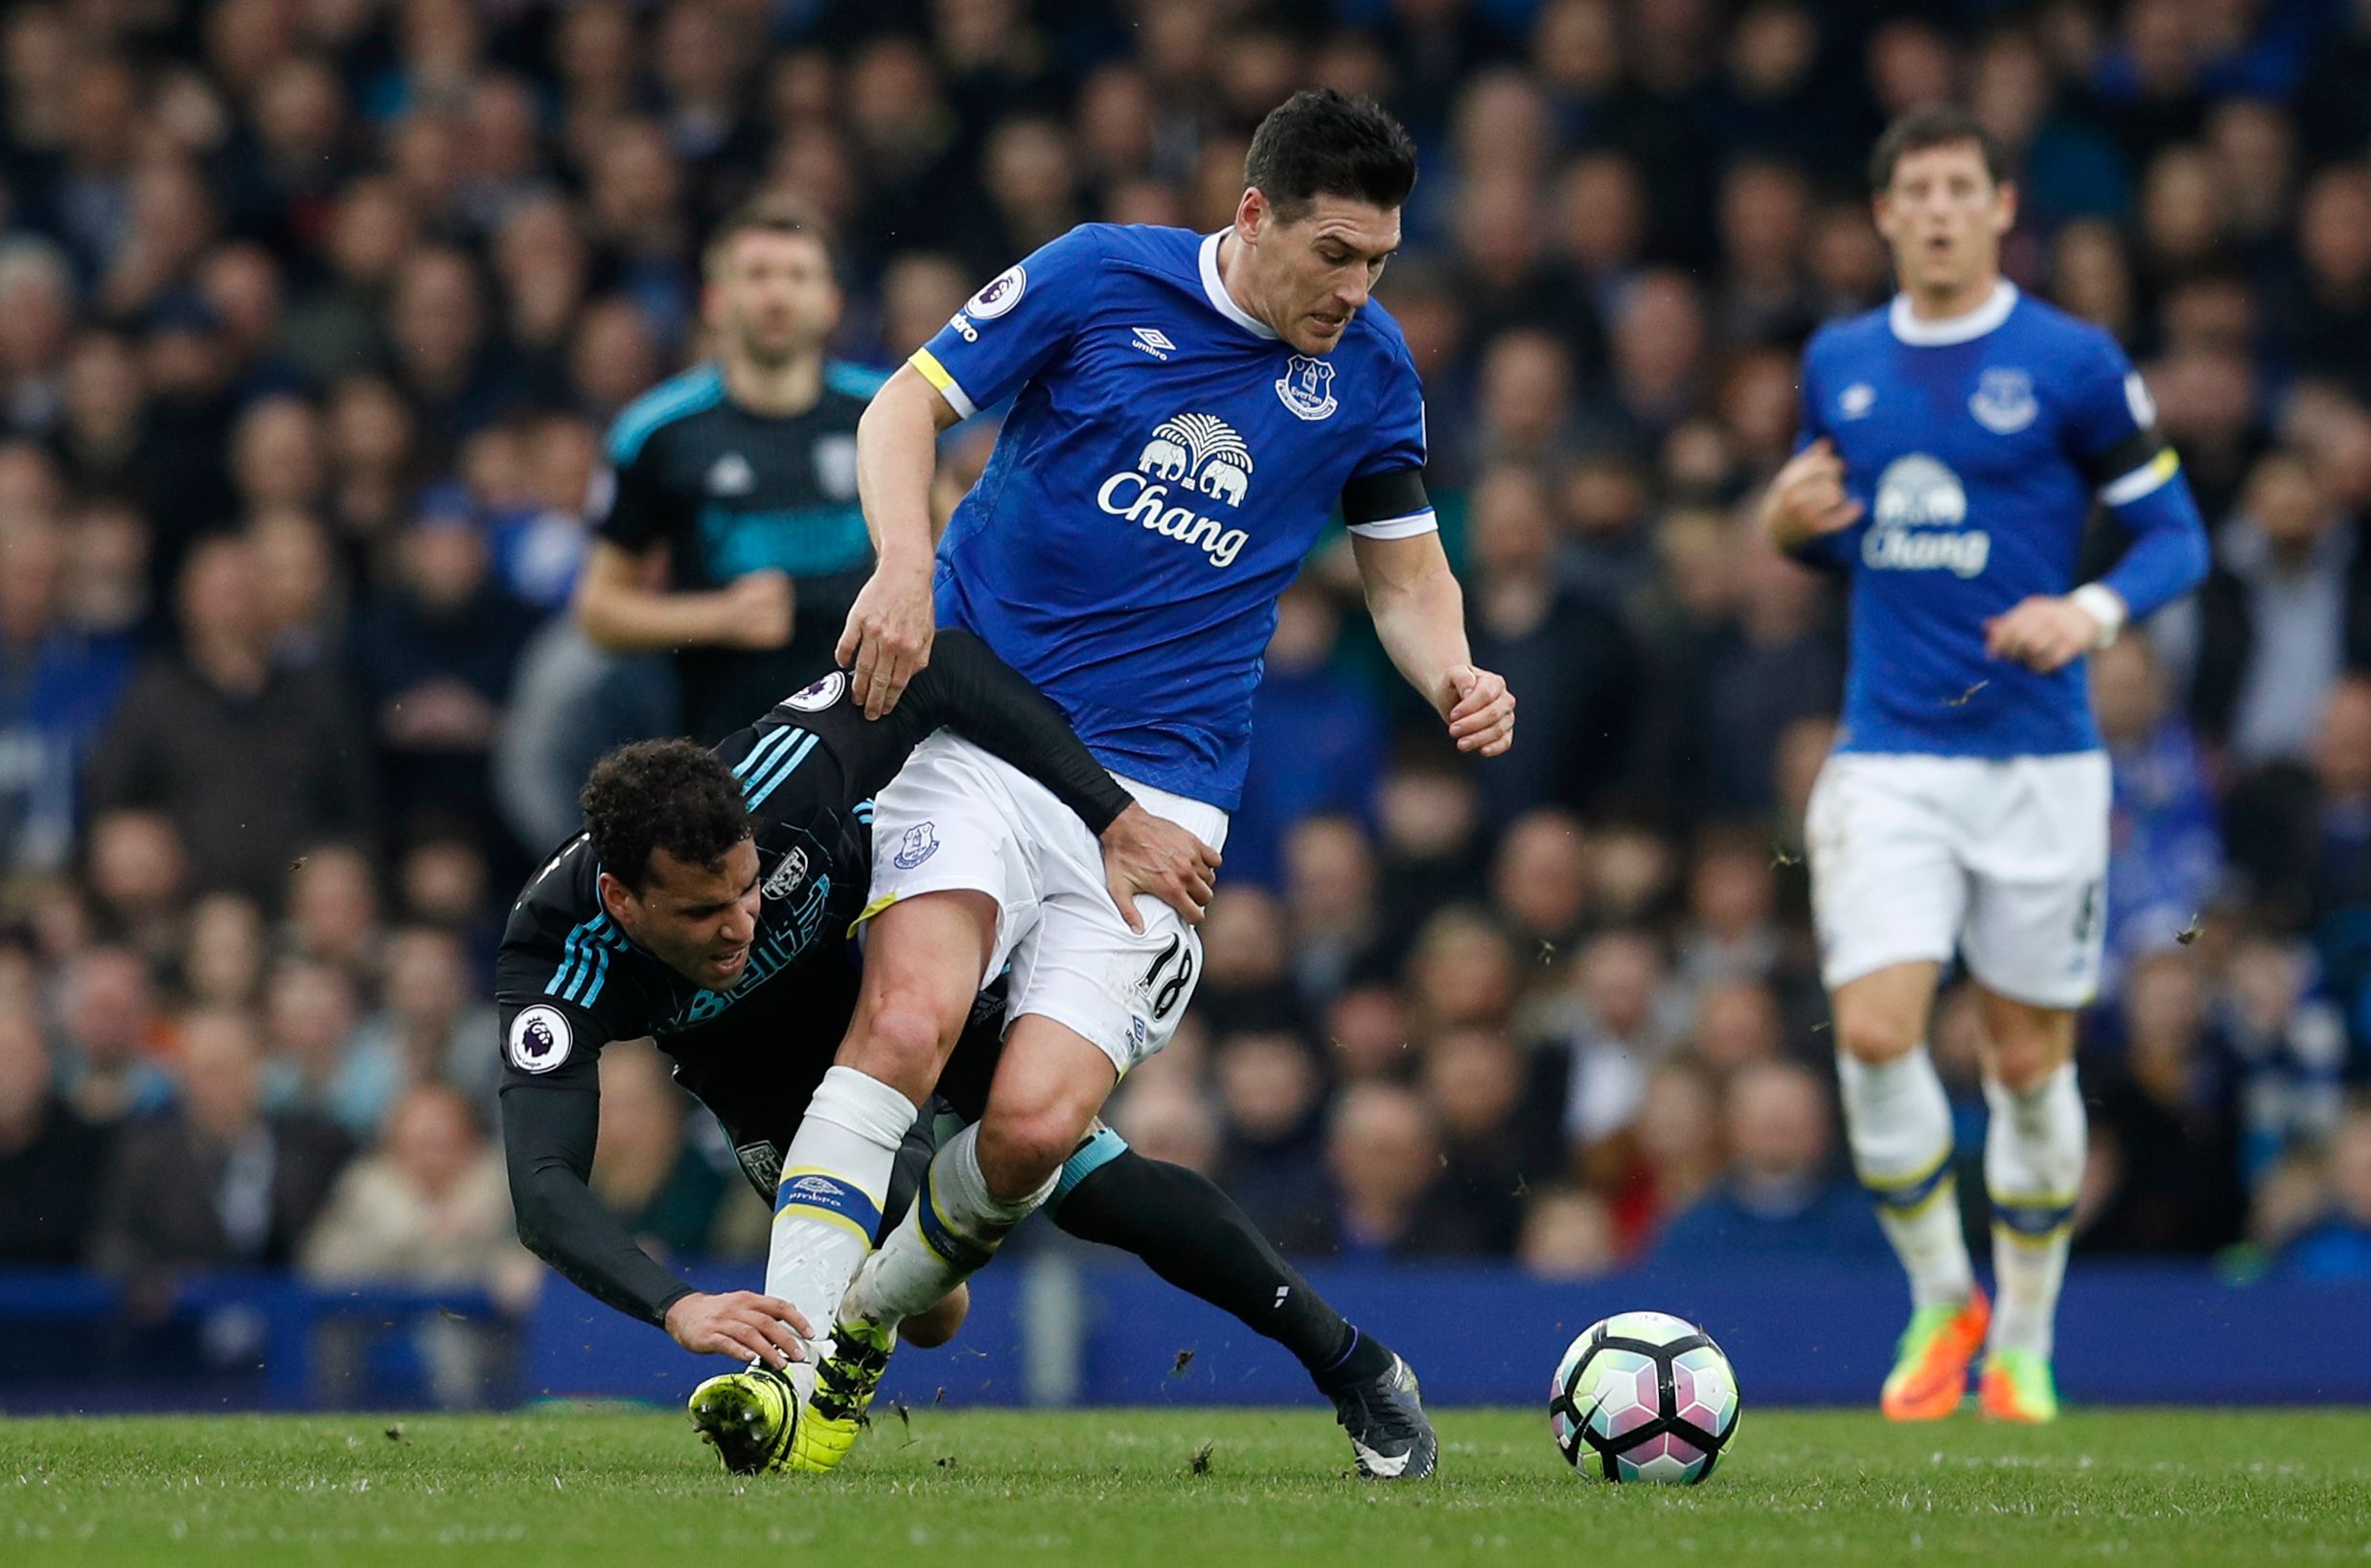 Britain Football Soccer - Everton v West Bromwich Albion - Premier League - Goodison Park - 11/3/17 Everton's Gareth Barry in action with West Bromwich Albion's Hal Robson-Kanu  Reuters / Phil Noble Livepic EDITORIAL USE ONLY. No use with unauthorized audio, video, data, fixture lists, club/league logos or 